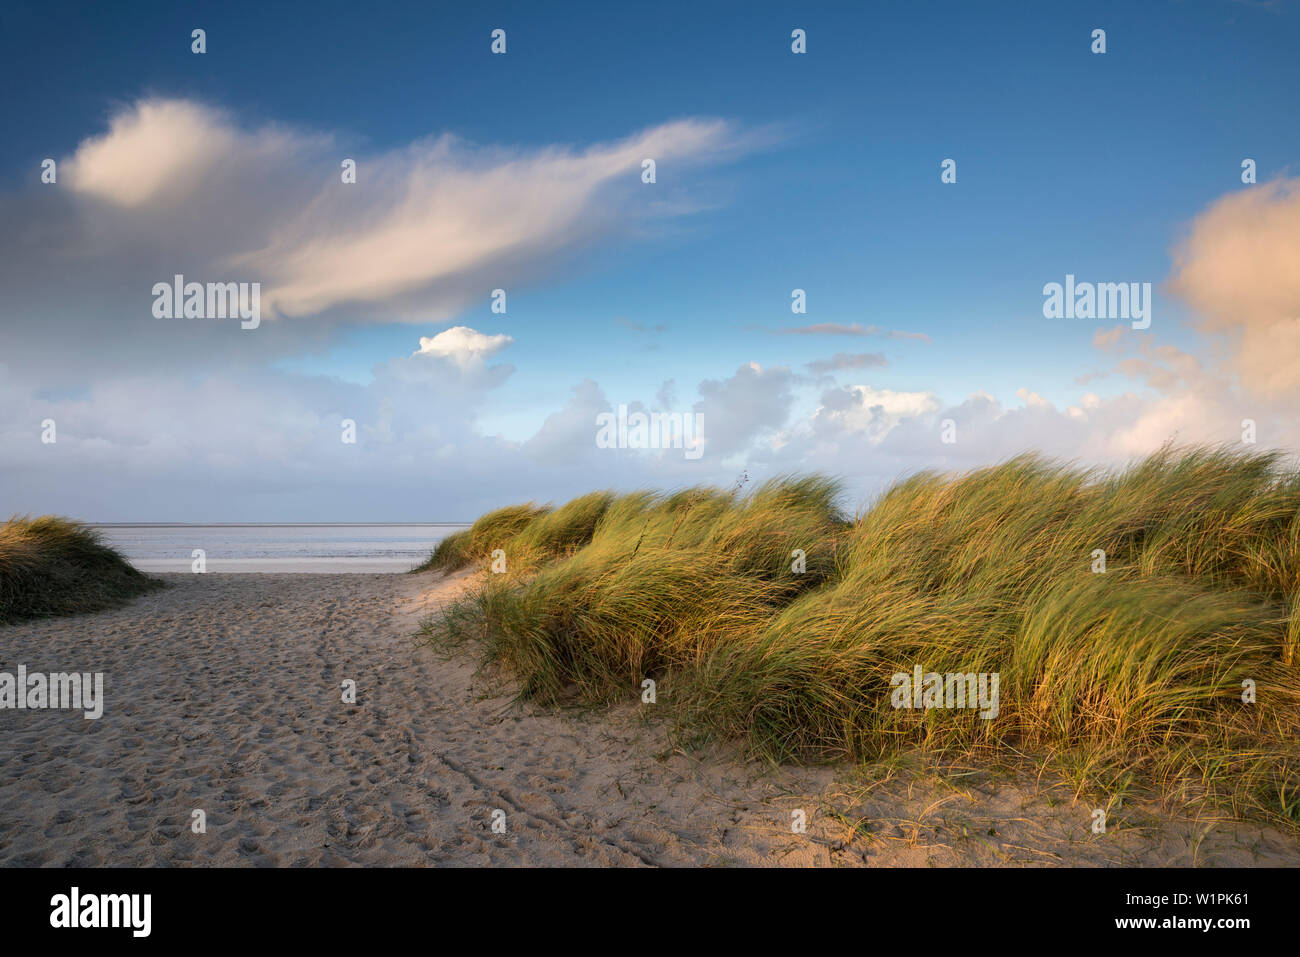 Path between sand dunes in evening light, North Sea, Wattenmeer National Park, Schillig, Wangerland, Friesland District, Lower Saxony, Germany, Europe Stock Photo